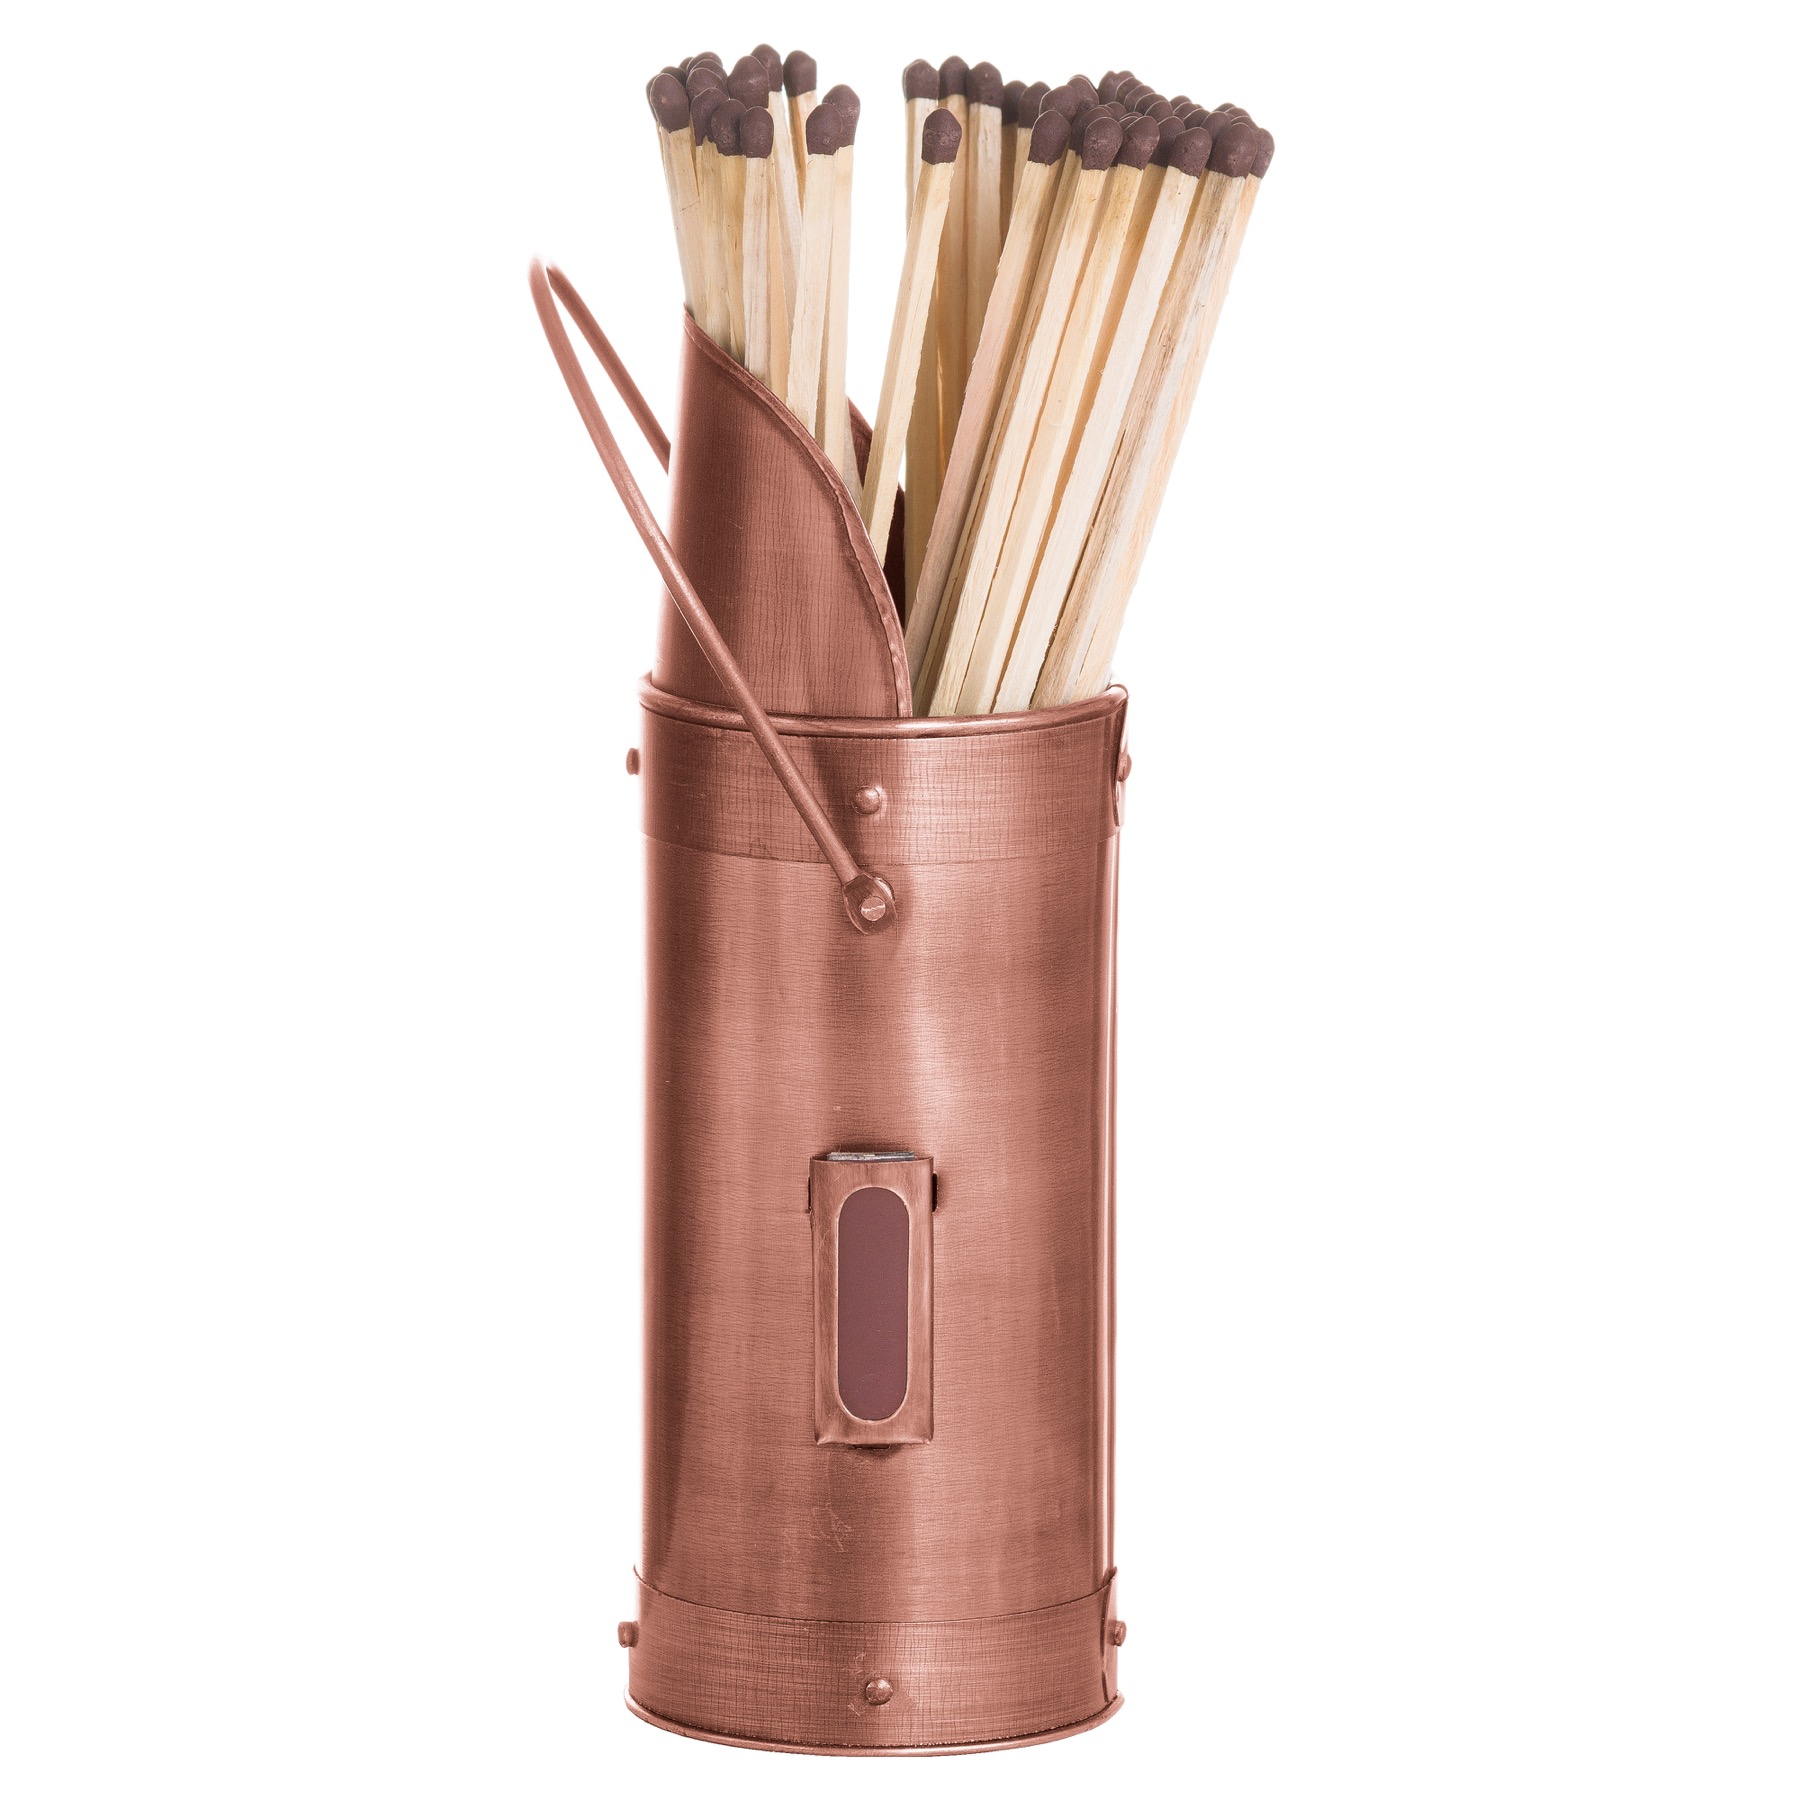 Copper Match Holder With 60 Matches - Image 1